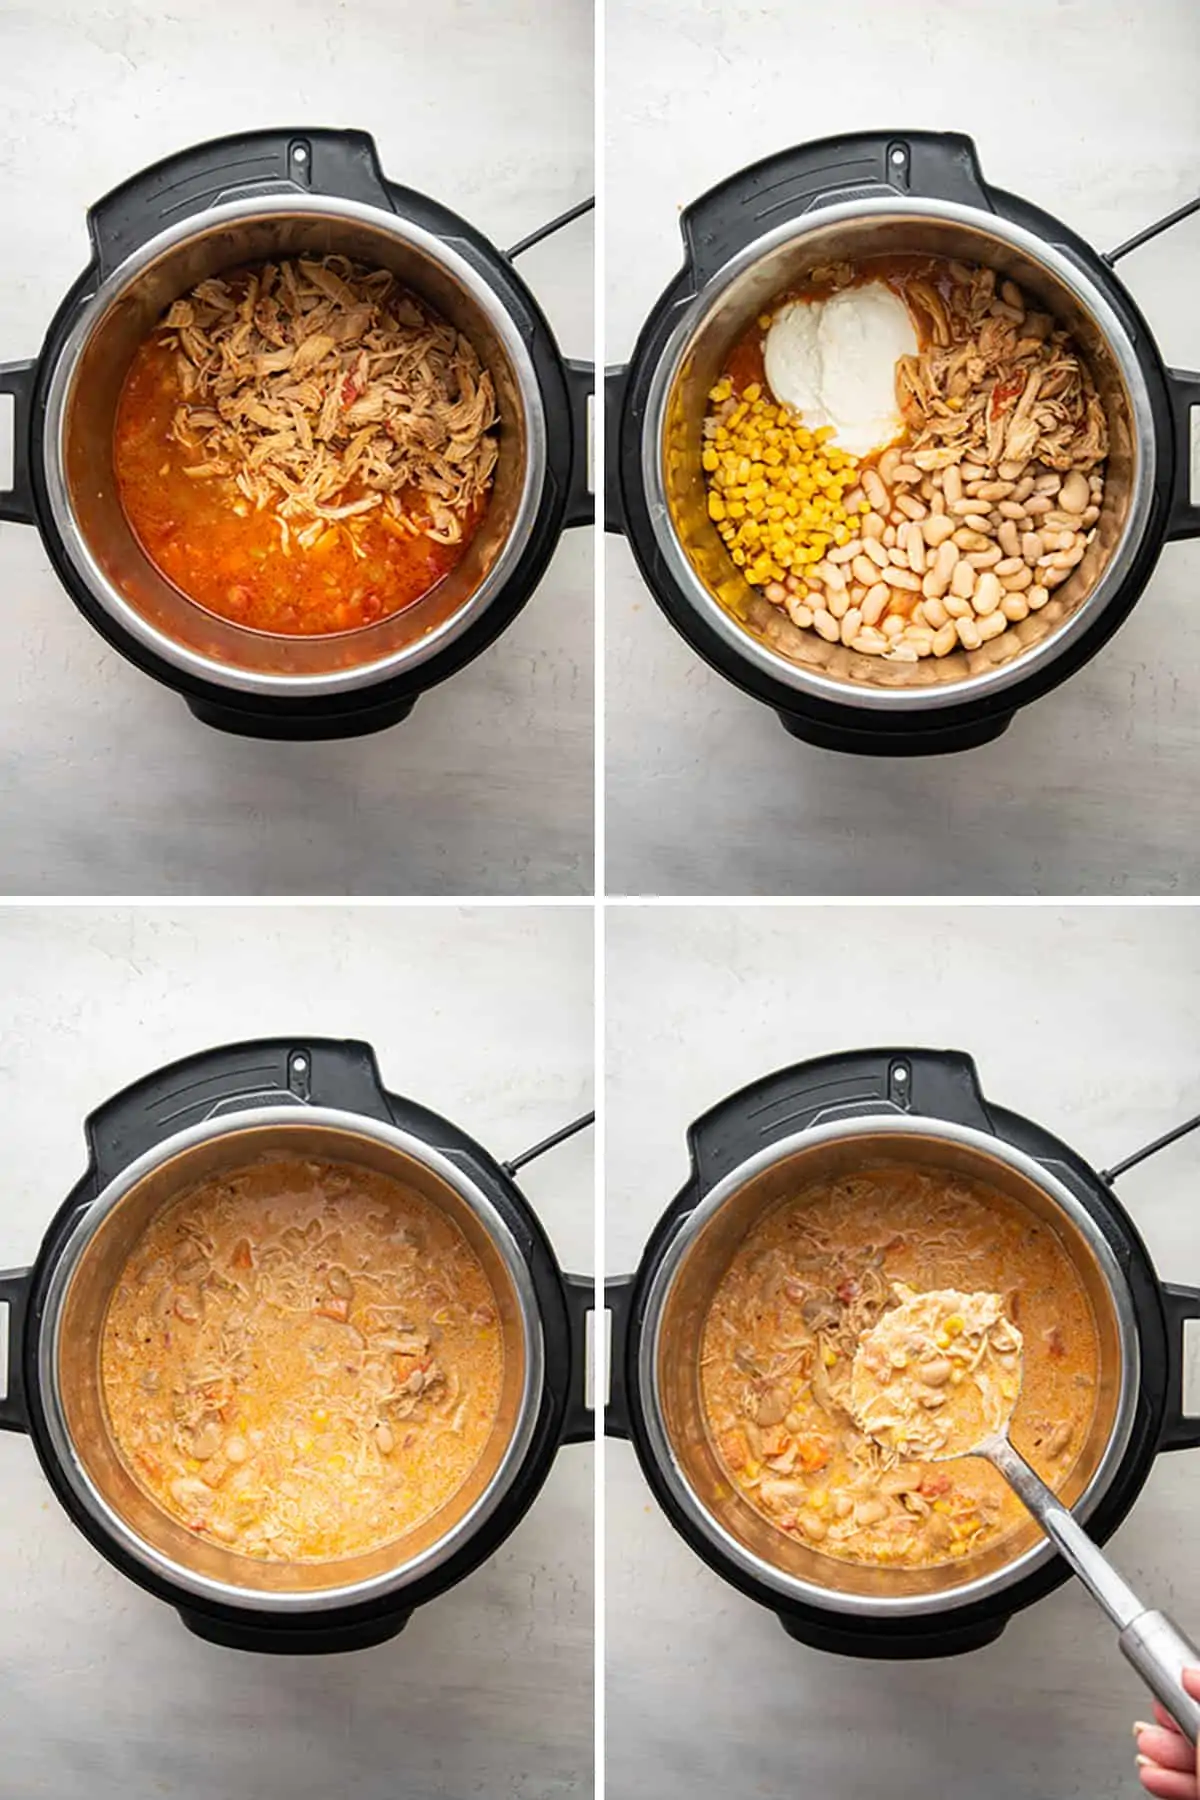 Four pictures: an Instant Pot with shredded chicken on top of chili; an Instant Pot with beans, corn, and sour cream on top of chili; finished white chicken chili in an Instant Pot; and a spoon holding a spoonful of white chicken chili above an Instant Pot